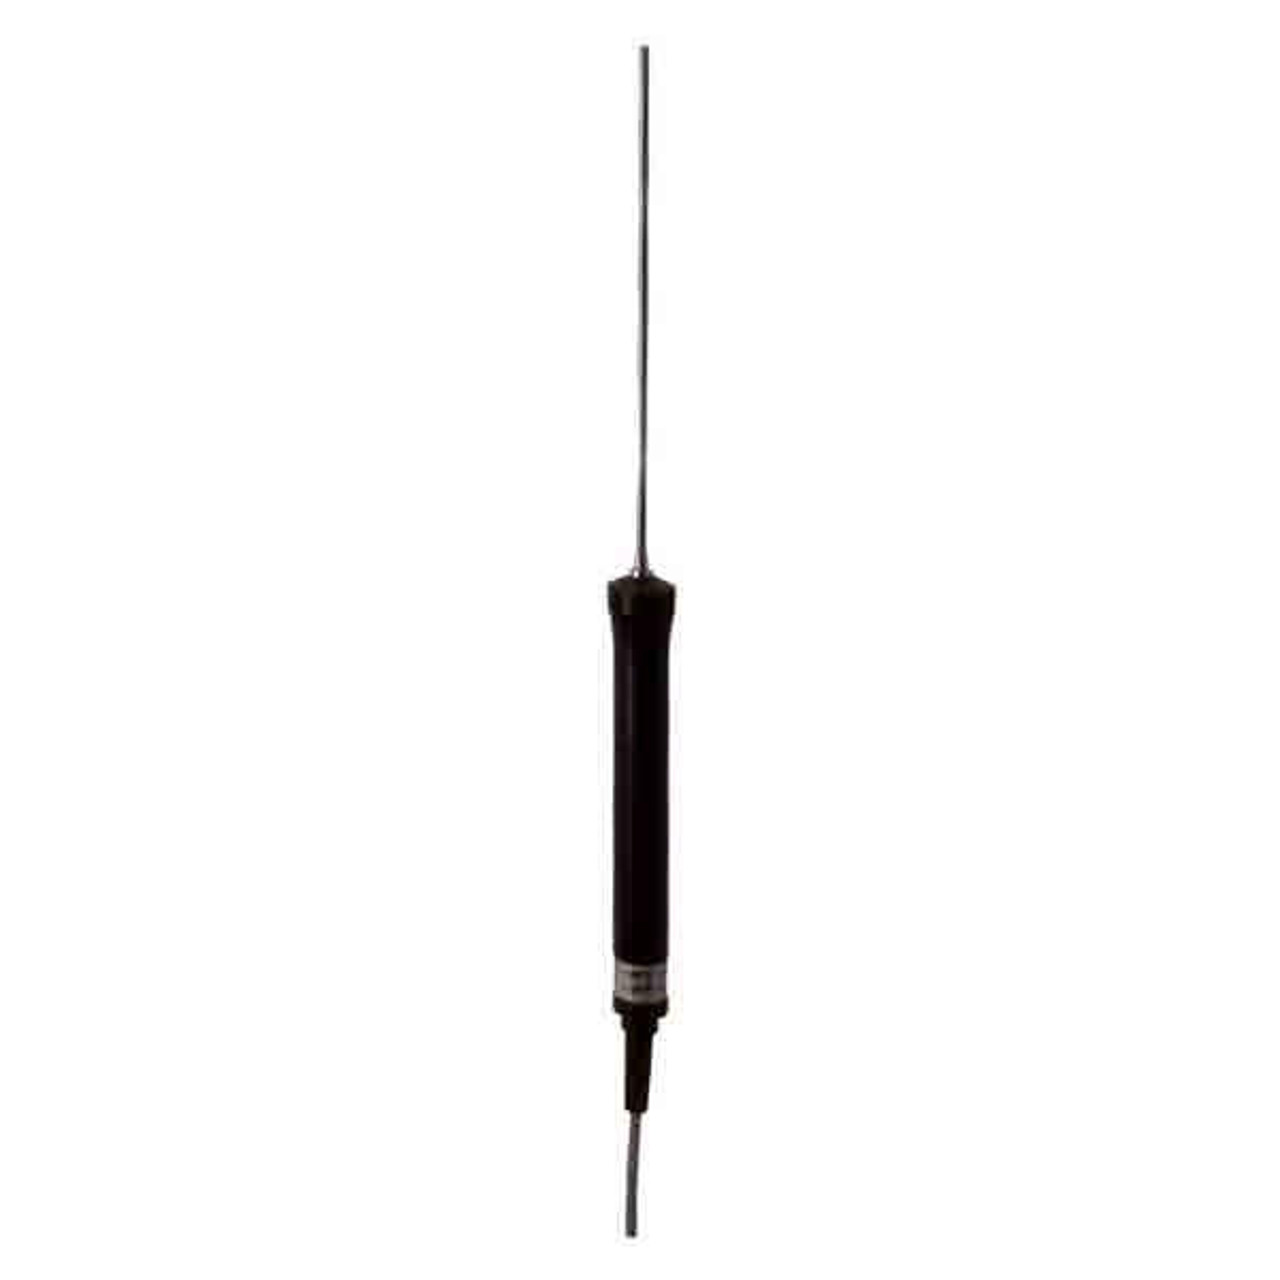 Sper Scientific - 800061 - Large Type K Immersion Thermometer Probe